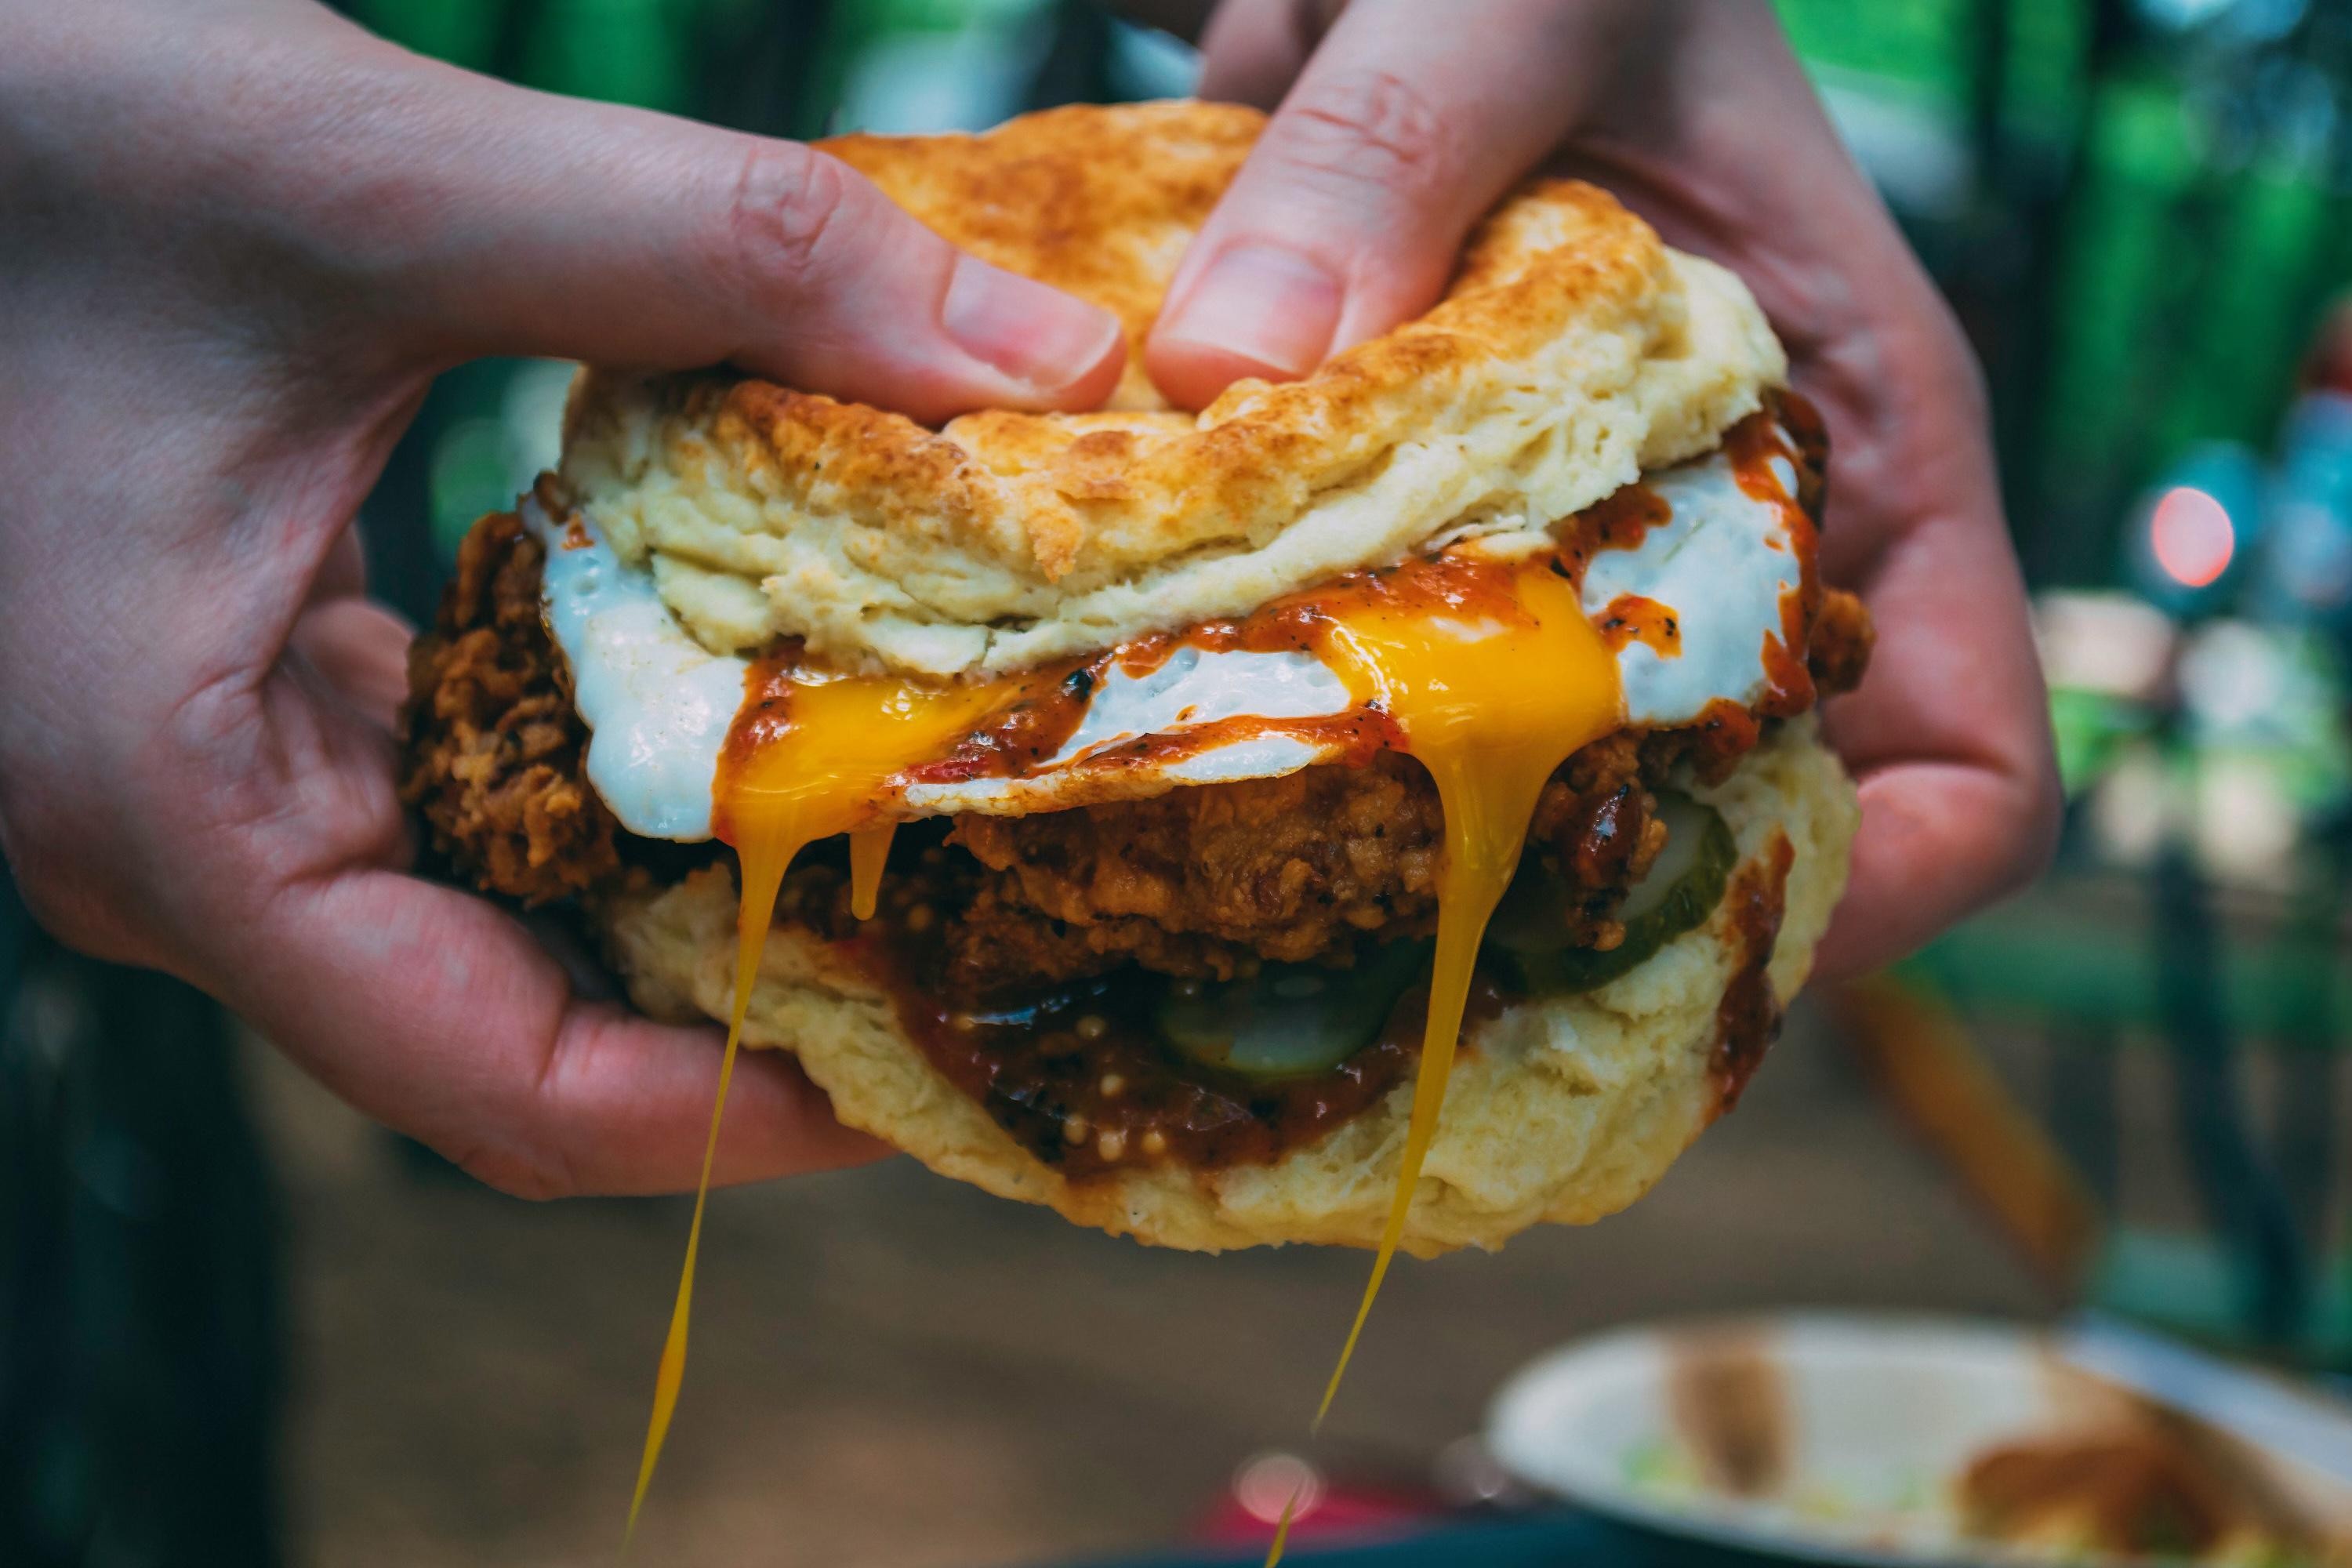 “The Sweet Heat” Buttermilk Fried Chicken, House Pickles, Sweet Heat Sauce, Sunny Egg, House-Made Whey Biscuit